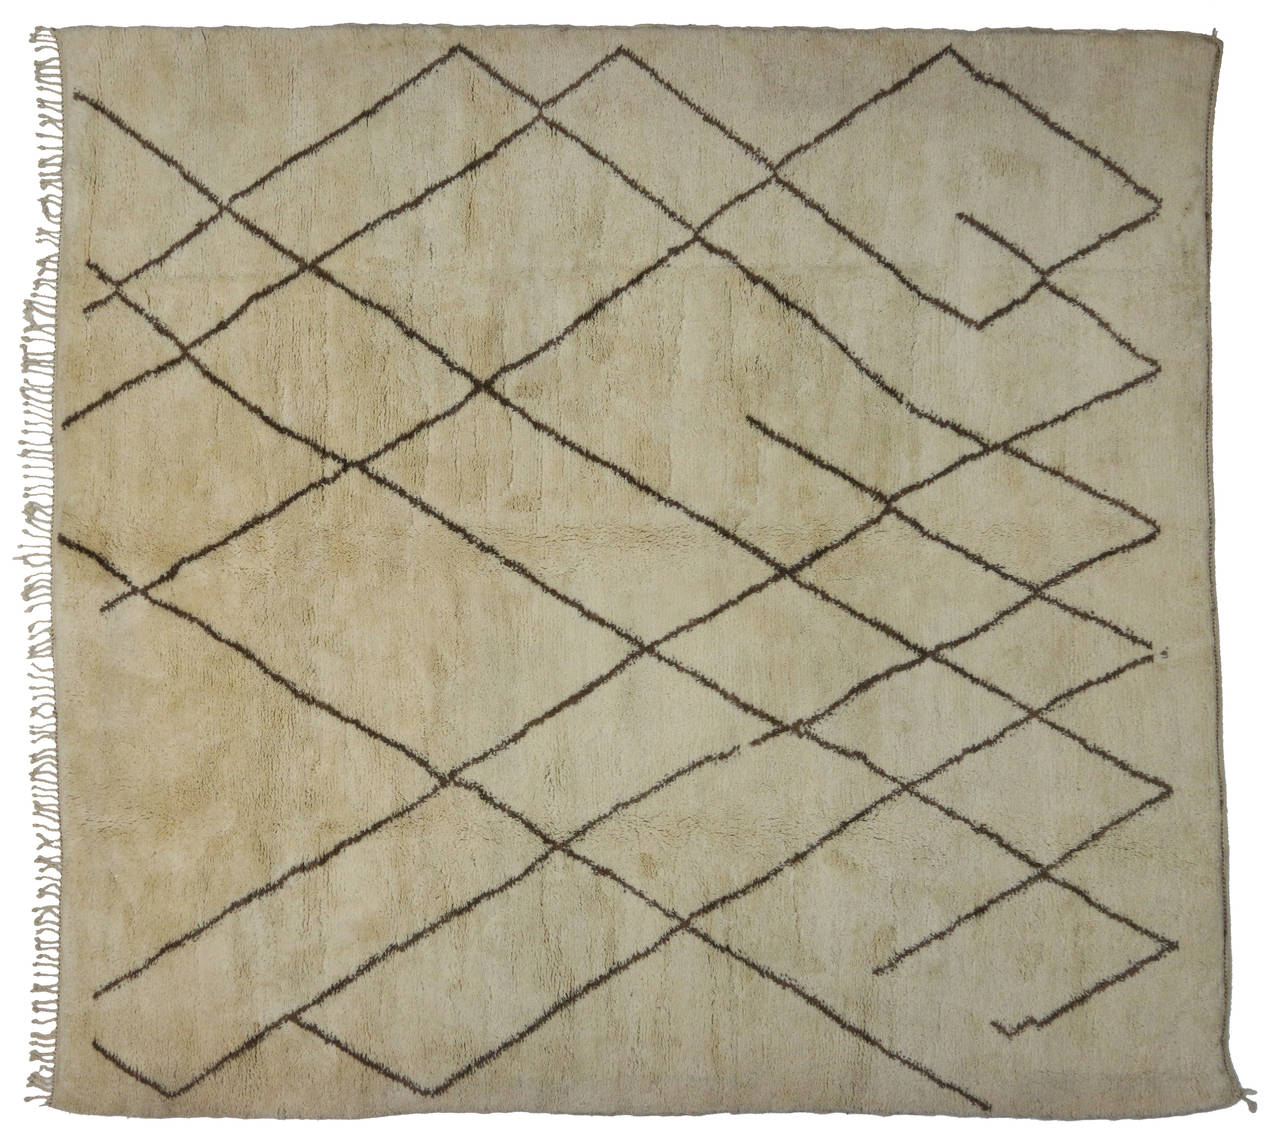 This Moroccan area rug harmonizes disparate elements, brings soothing serenity while adding texture and depth to your space. This is a wonderful example of a Moroccan rug, woven with a clean and simple, yet sophisticated composition. The off white,